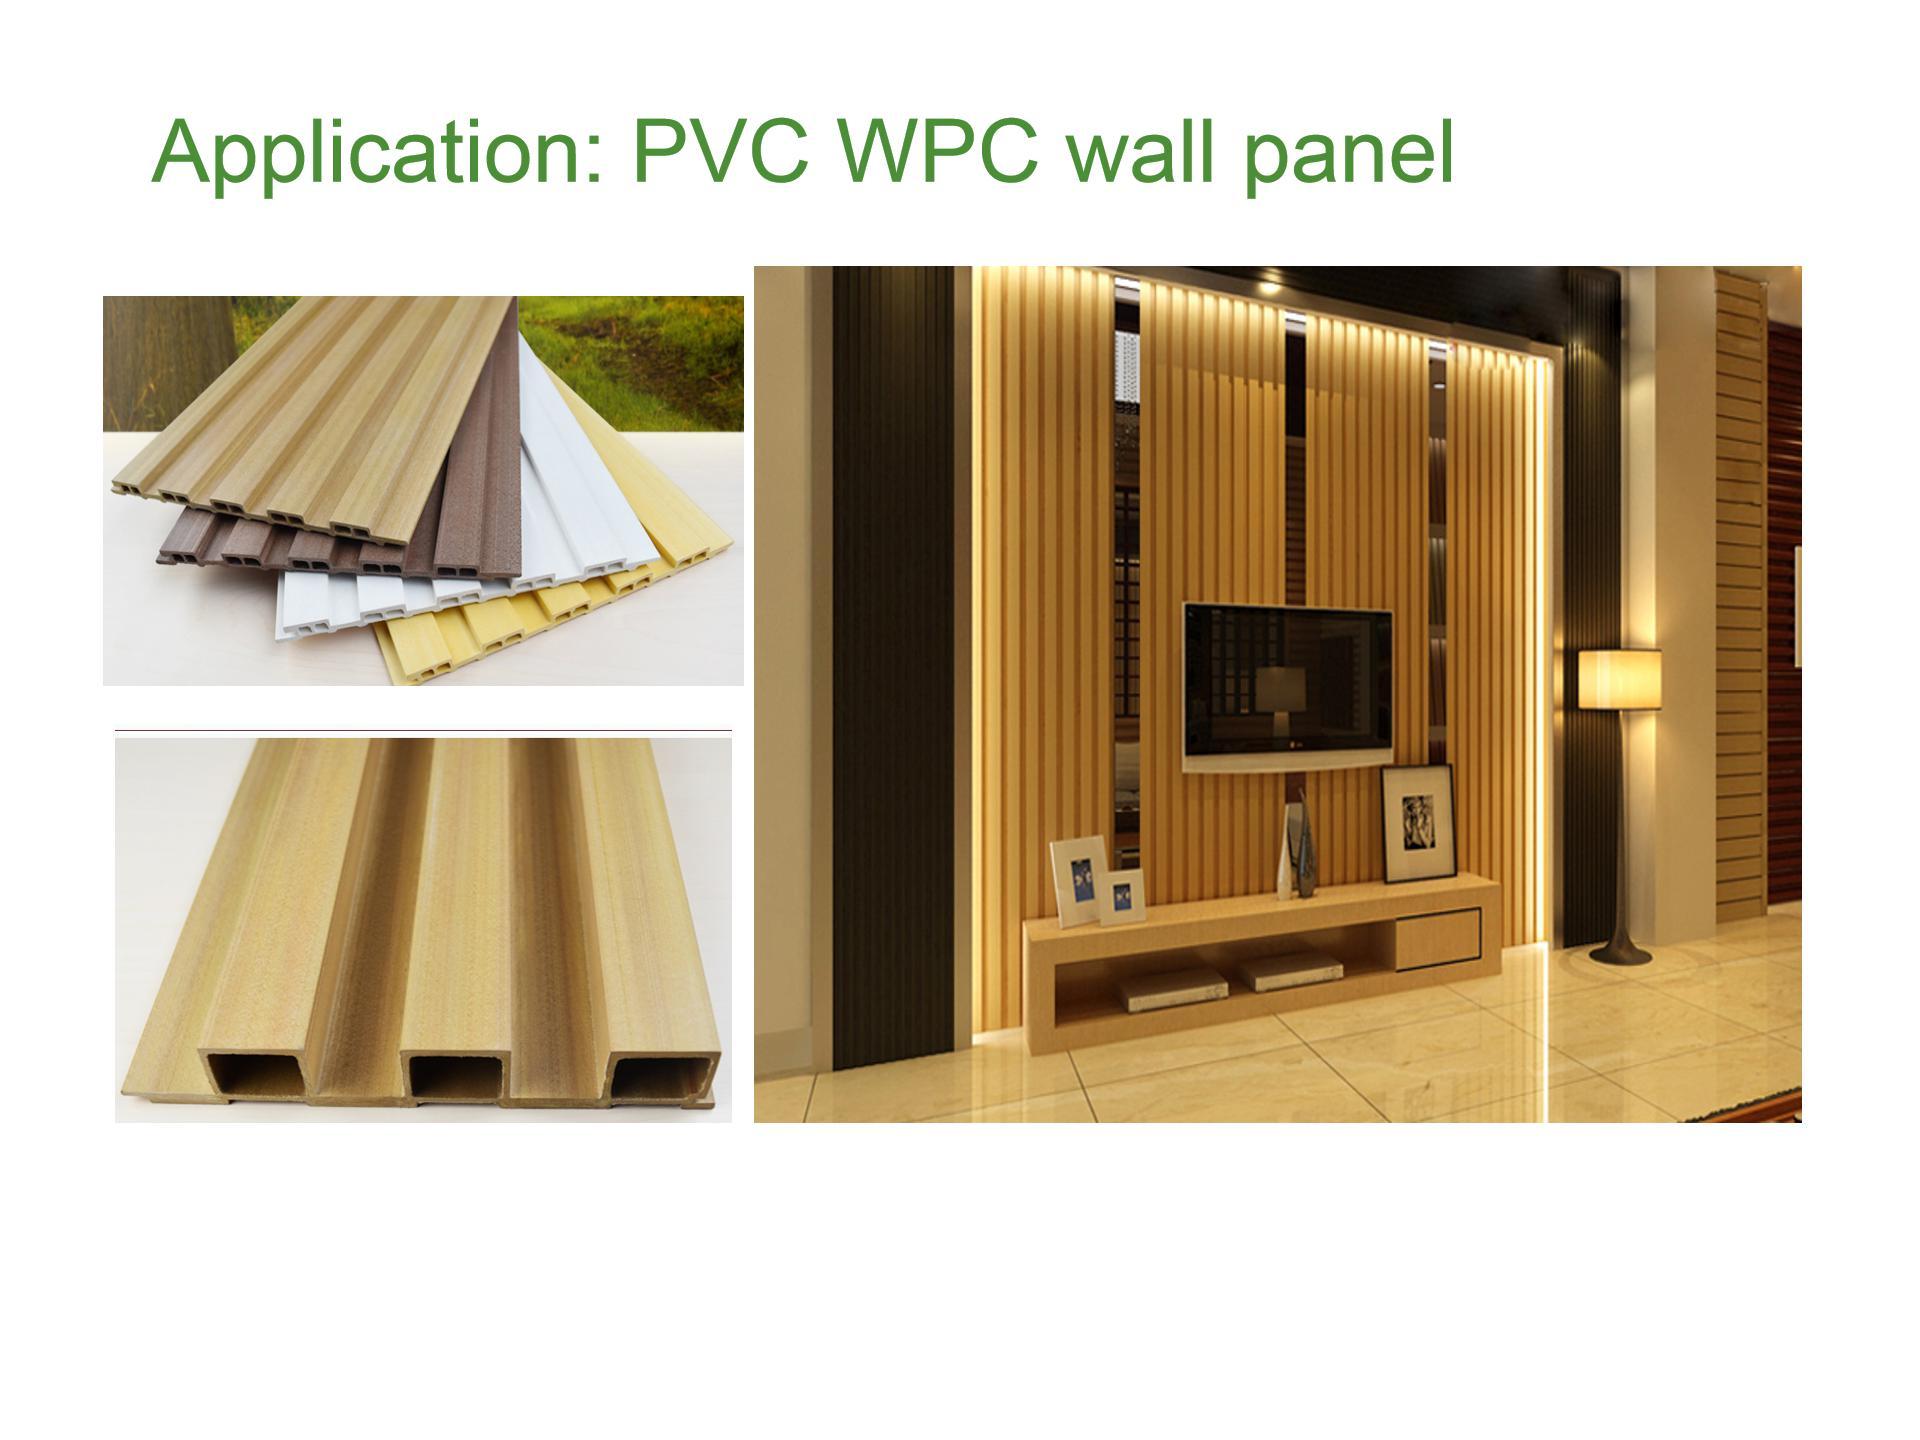 Colorful WPC wall panel installed